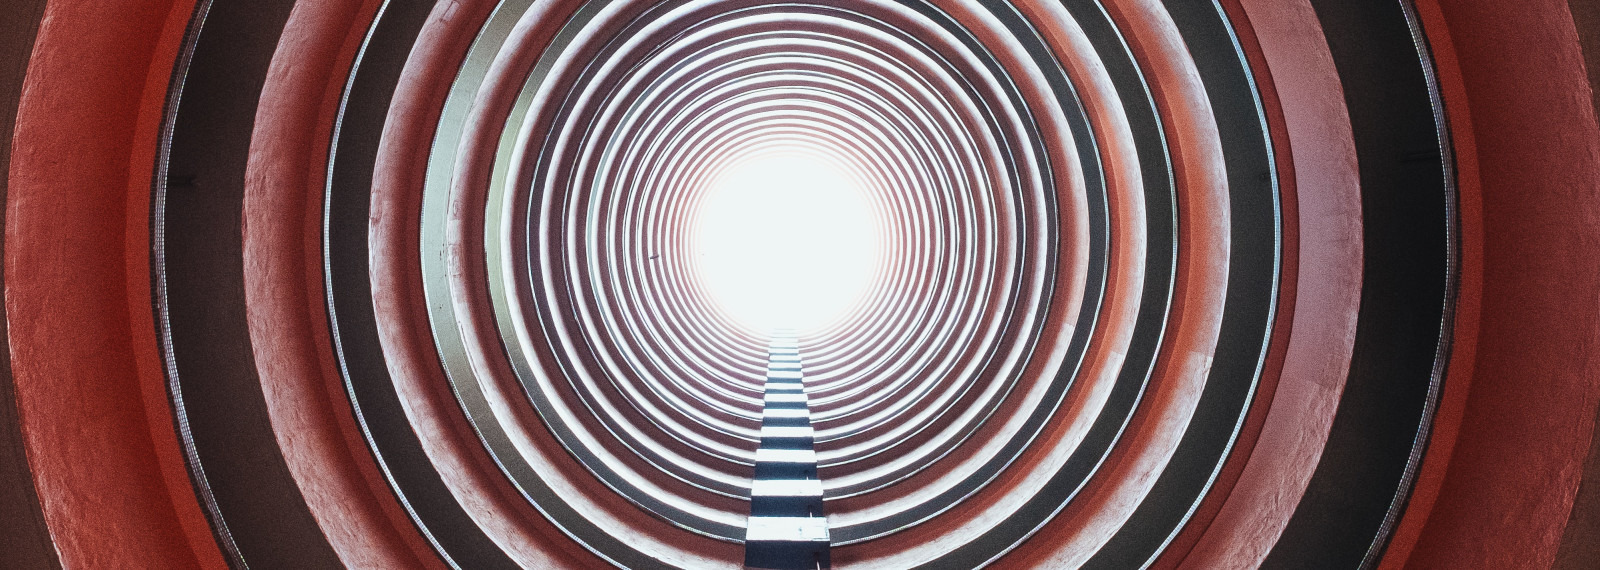 Looking up in the inside of a circular building